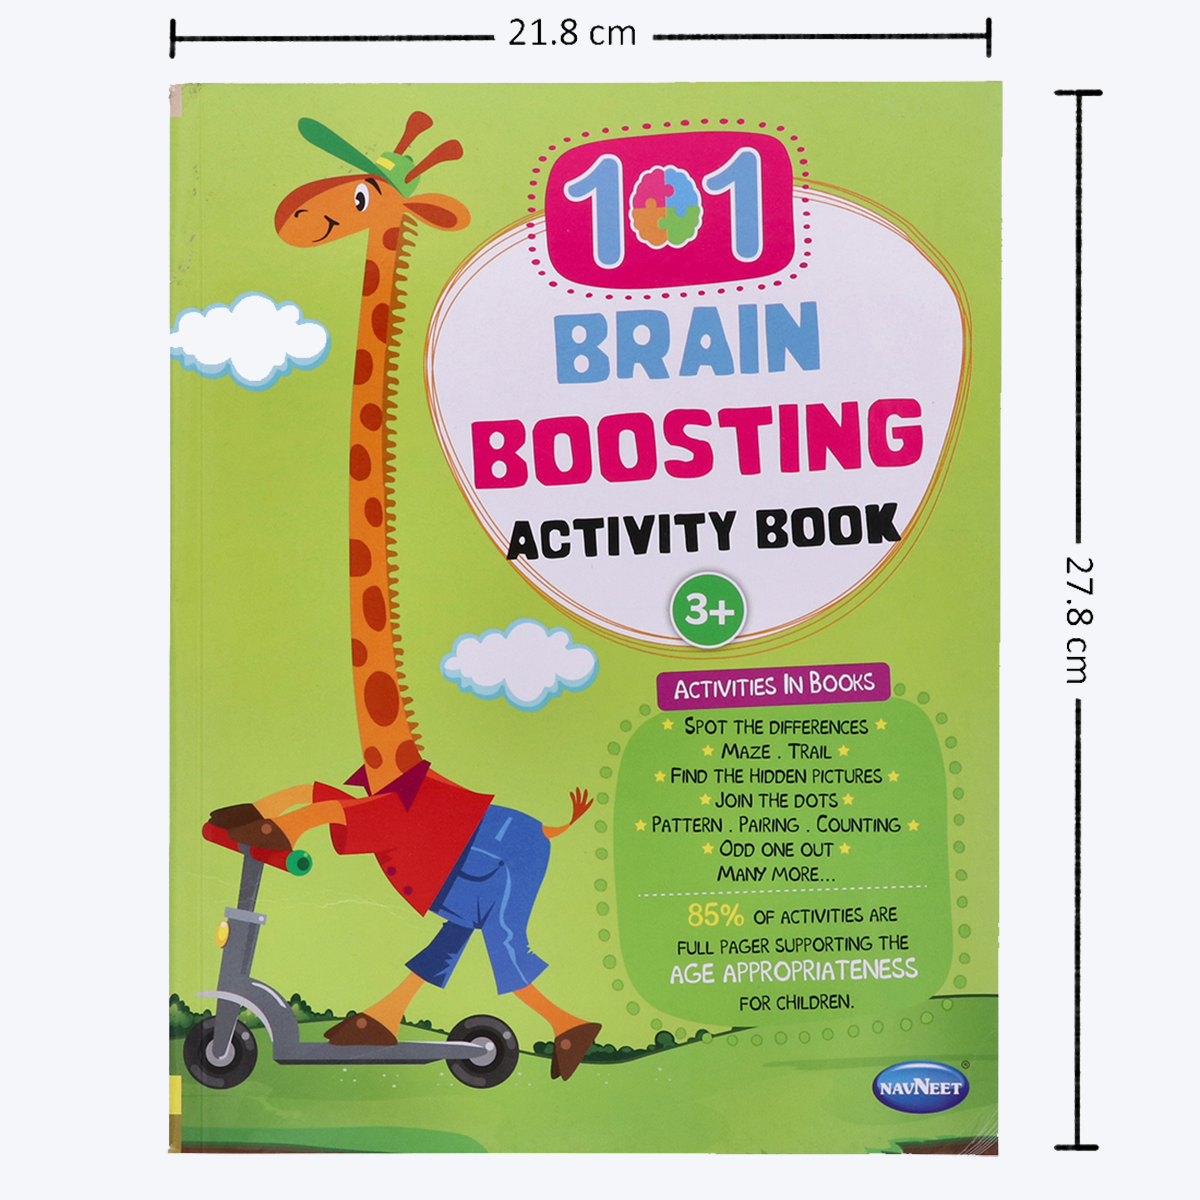 Navneet 101 Brain Boosting Activity Book- Preschool Kids- Age 3+, Logical reasoning, Best Brain teaser book- Fun activities - Maze, Hidden Picture, Puzzle, odd one out & more | 88 Pages